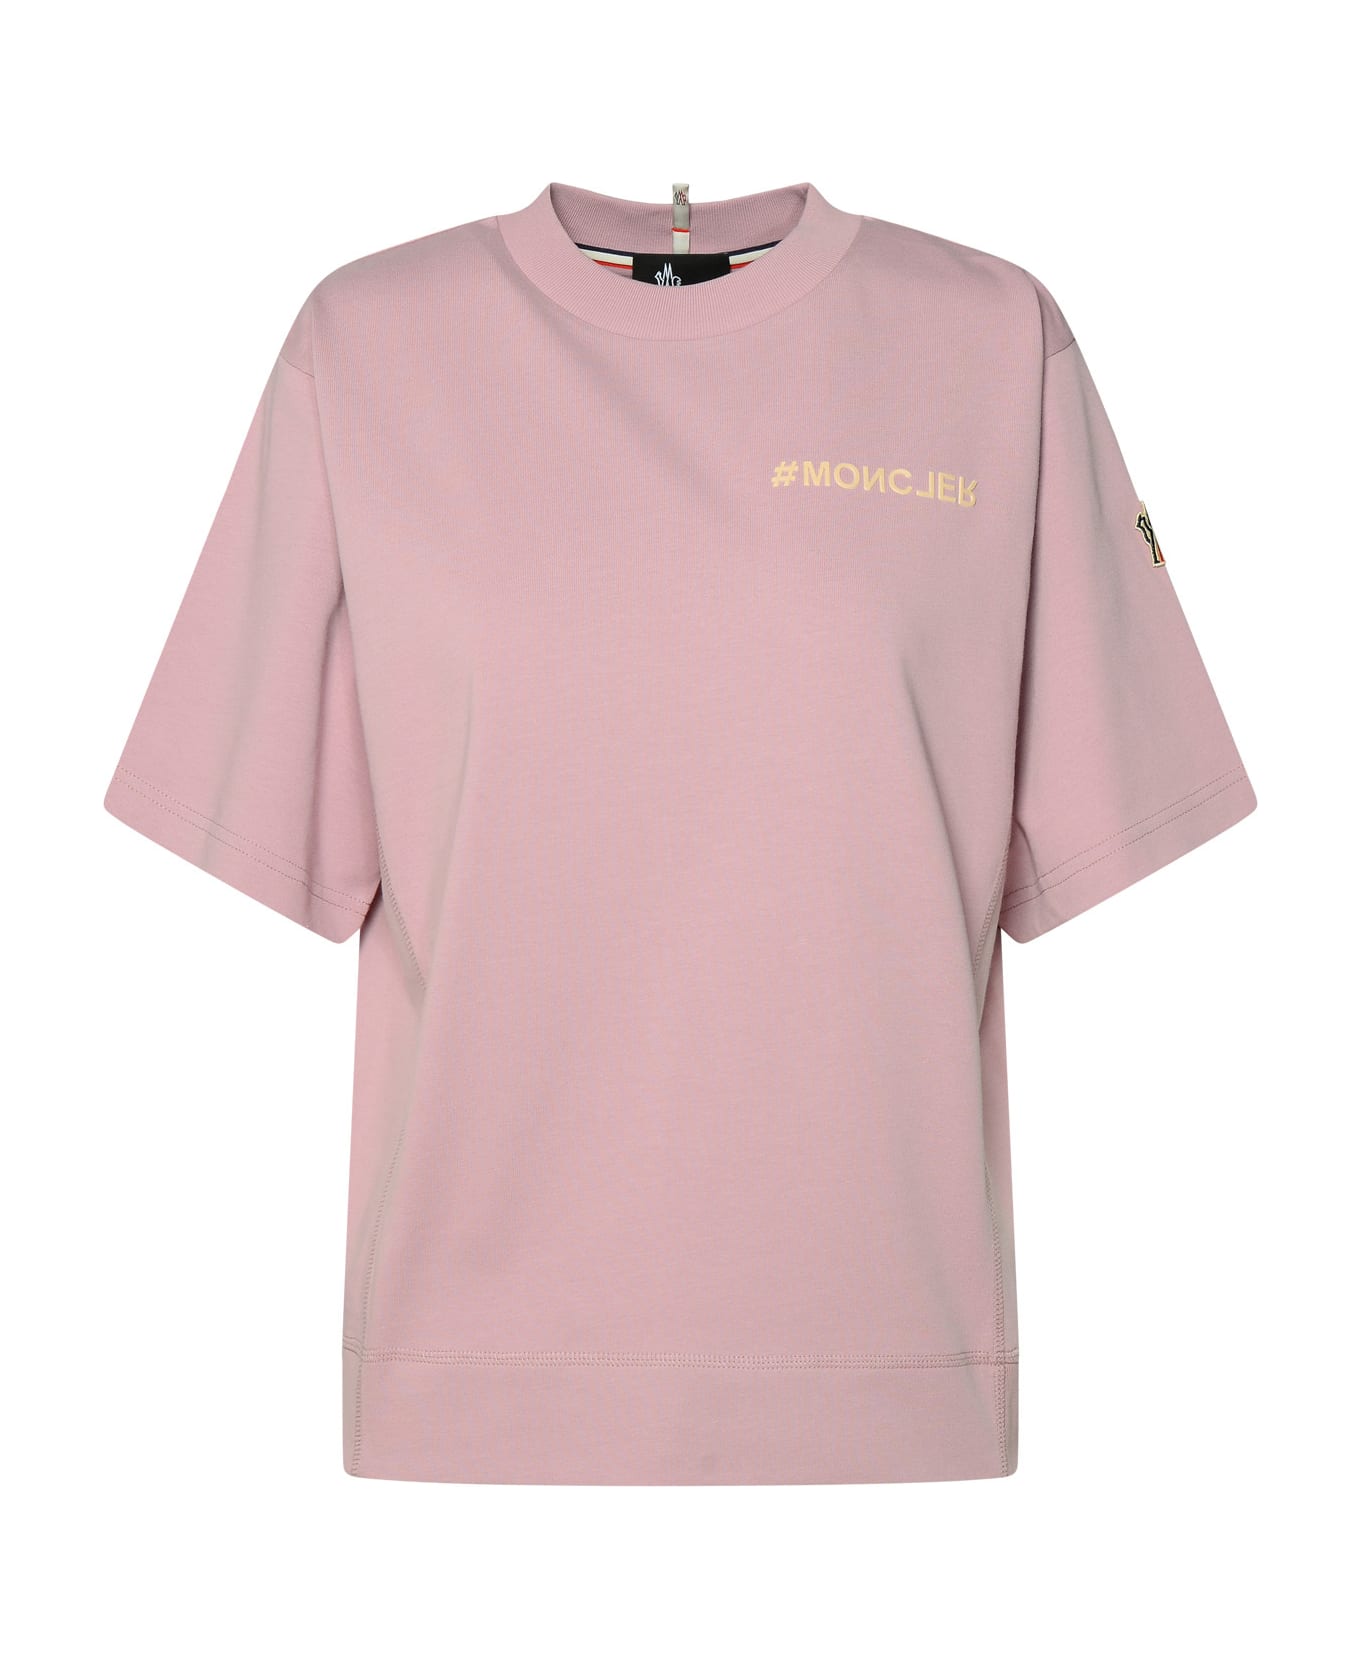 Moncler Grenoble Pink Cotton T-shirt - PINK Tシャツ